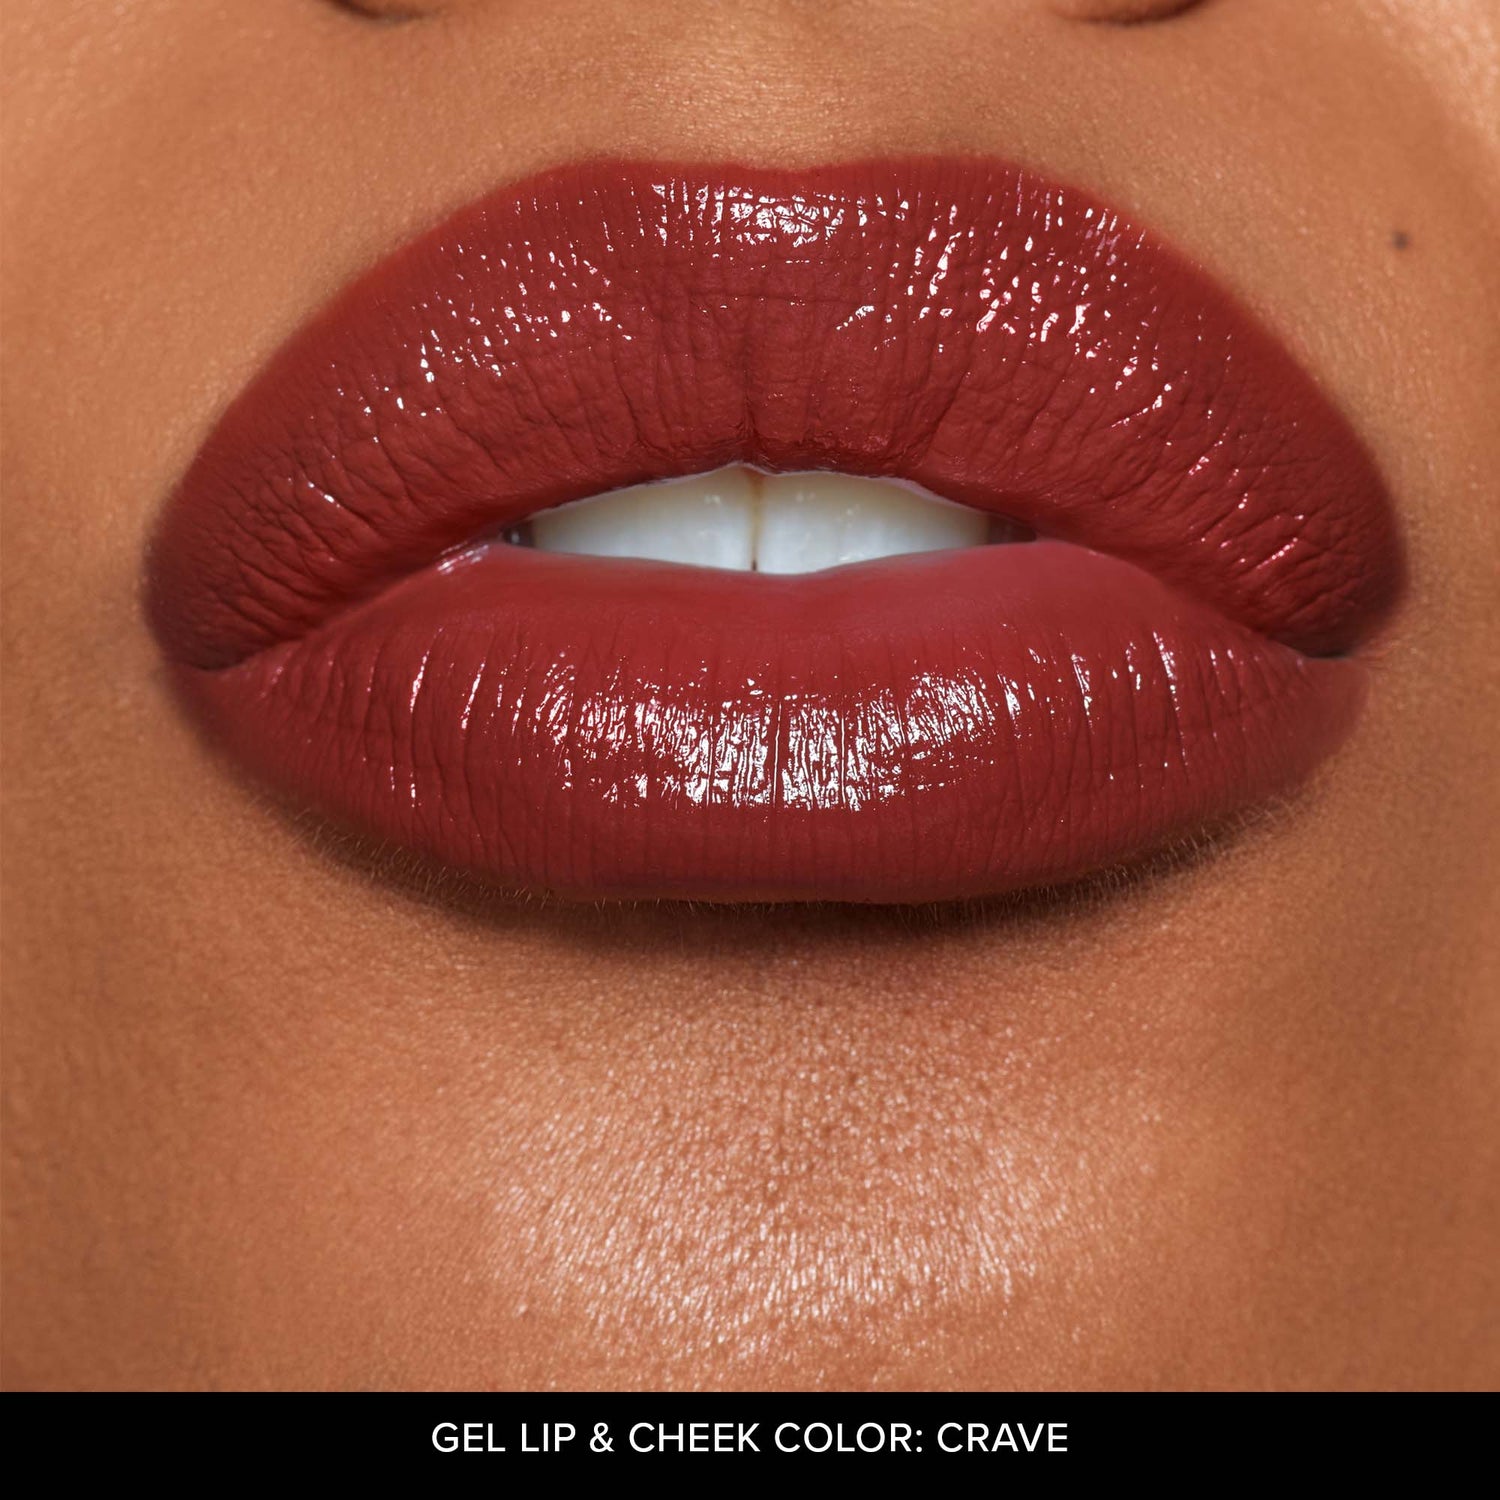 Close up of lips wearing Gel Lip & Cheek in shade Crave-3